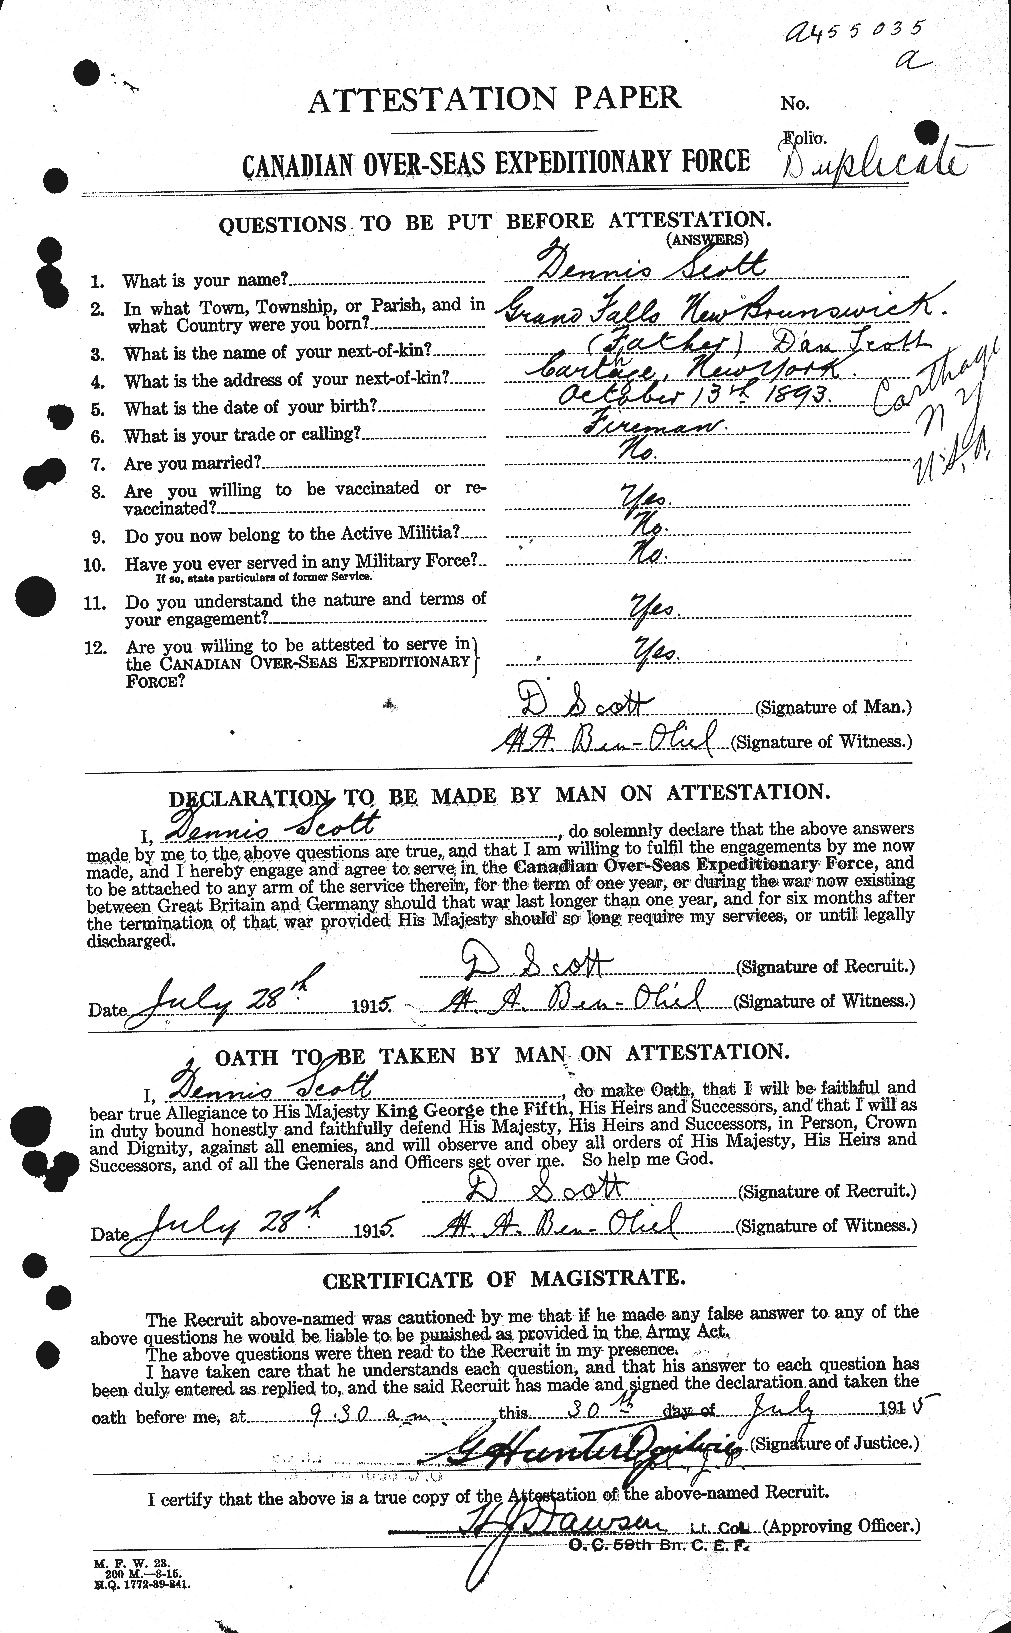 Personnel Records of the First World War - CEF 085367a